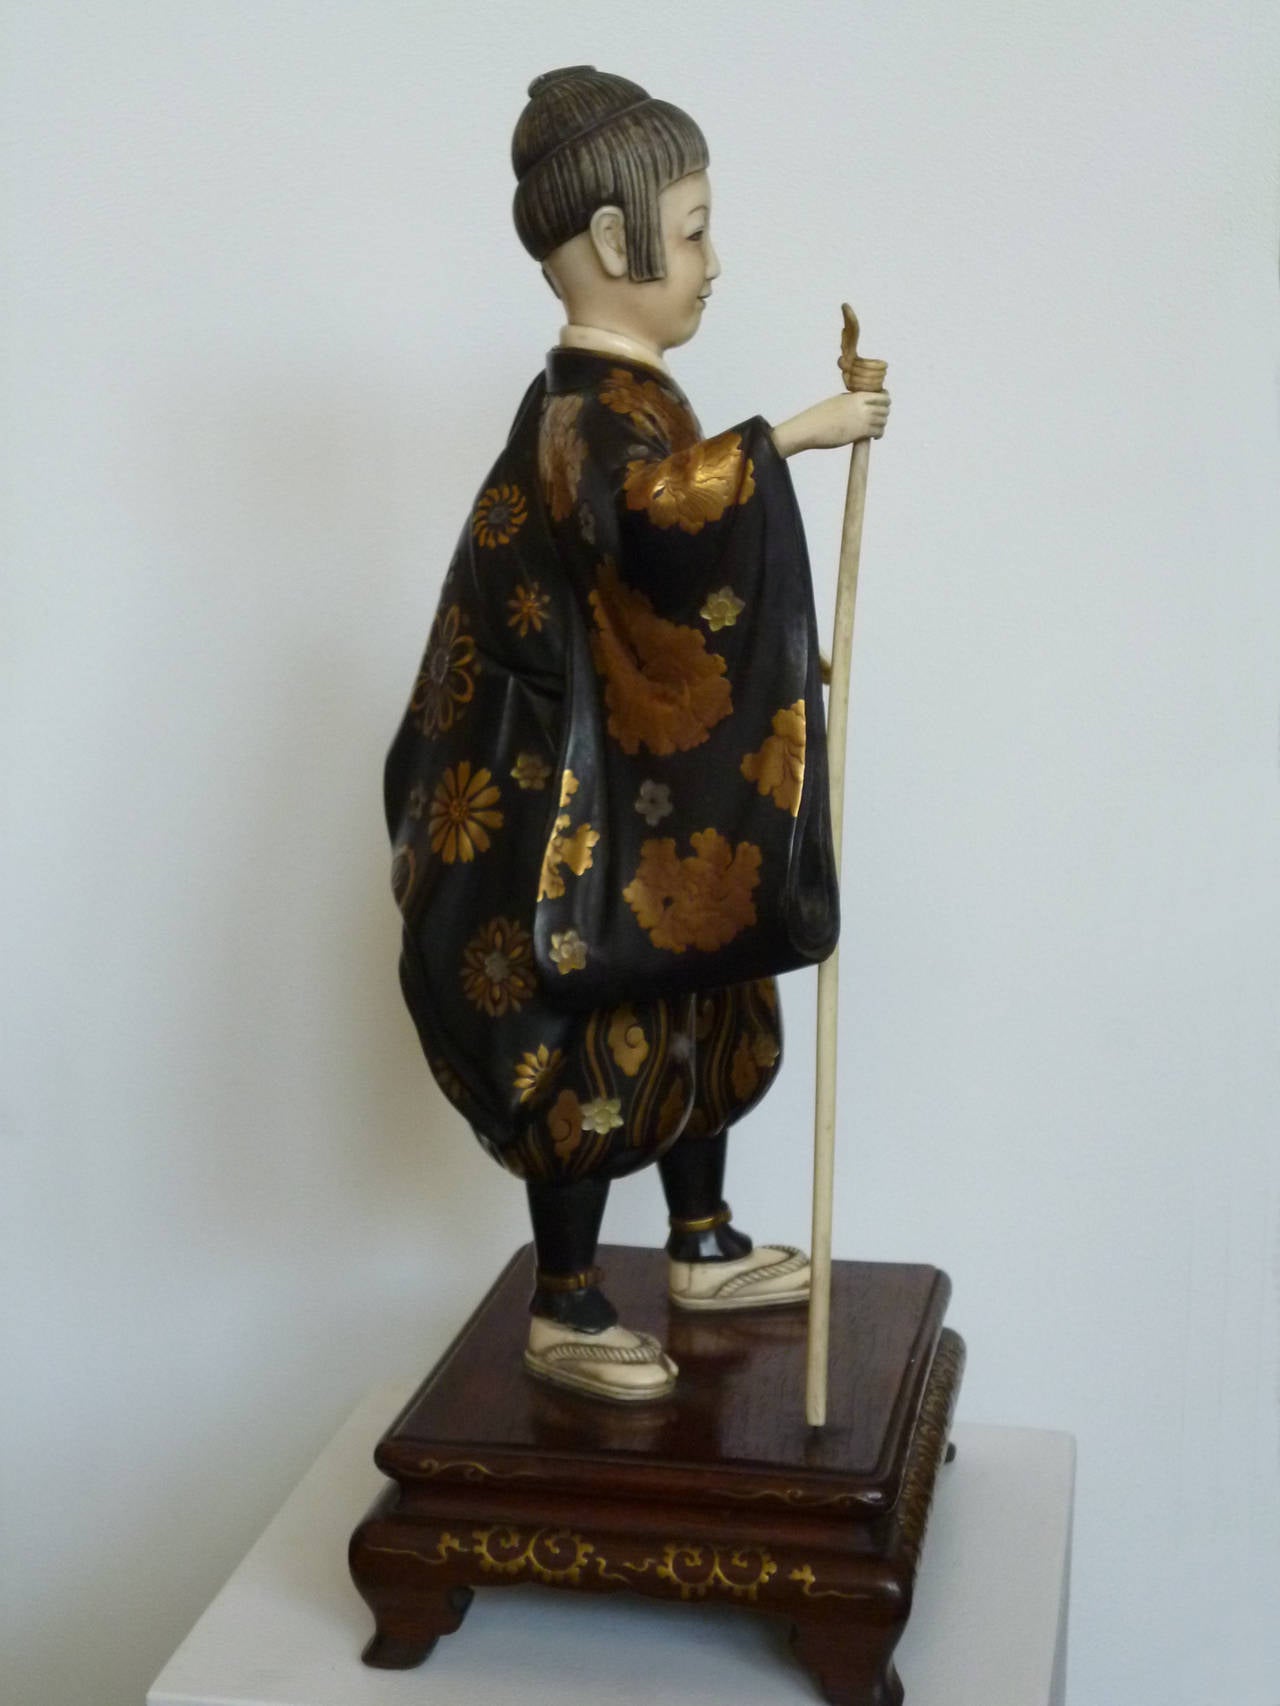 Japanese Delightful Standing Woman Figure from Japan